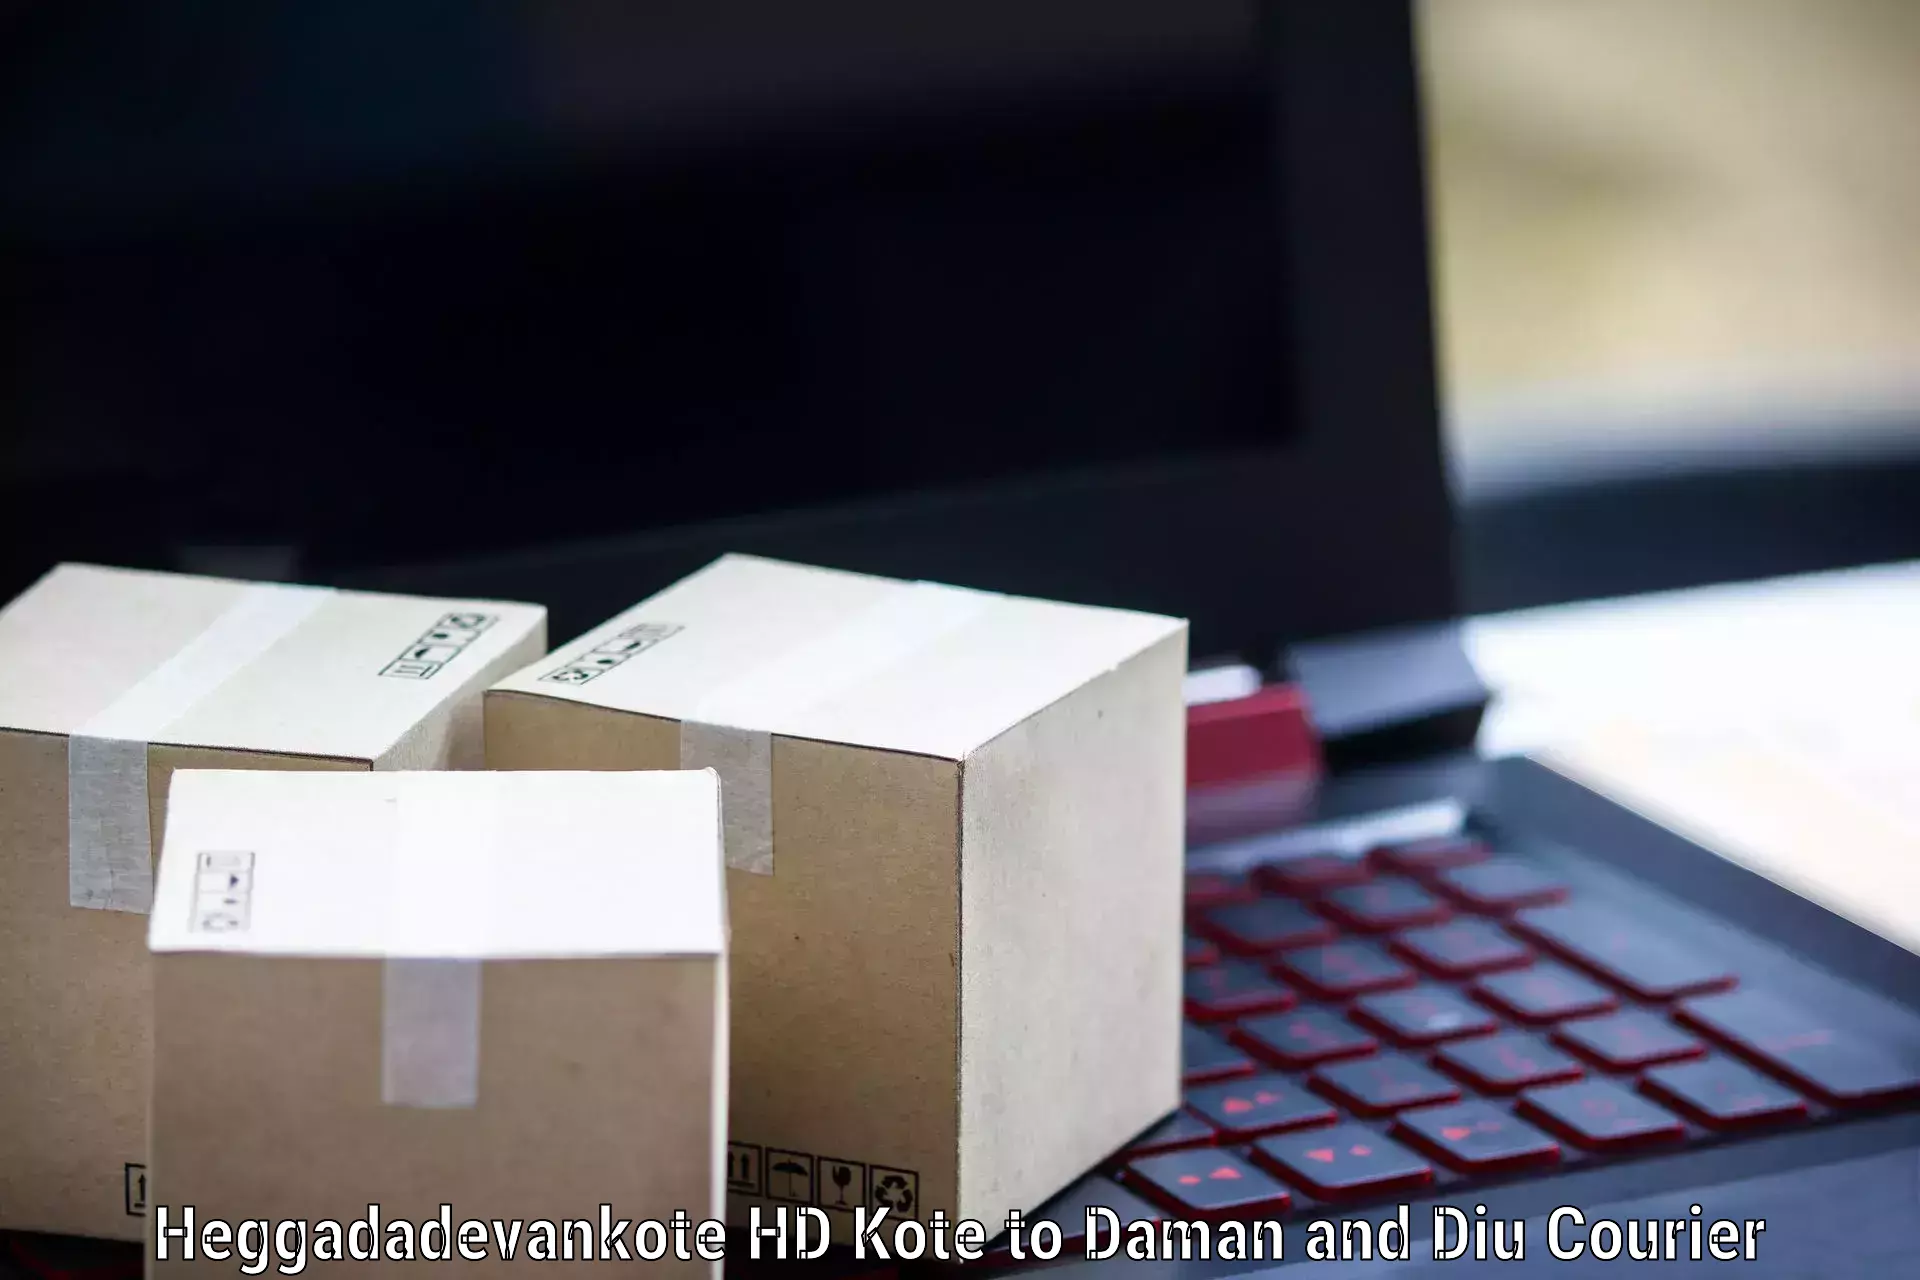 Professional courier services Heggadadevankote HD Kote to Daman and Diu